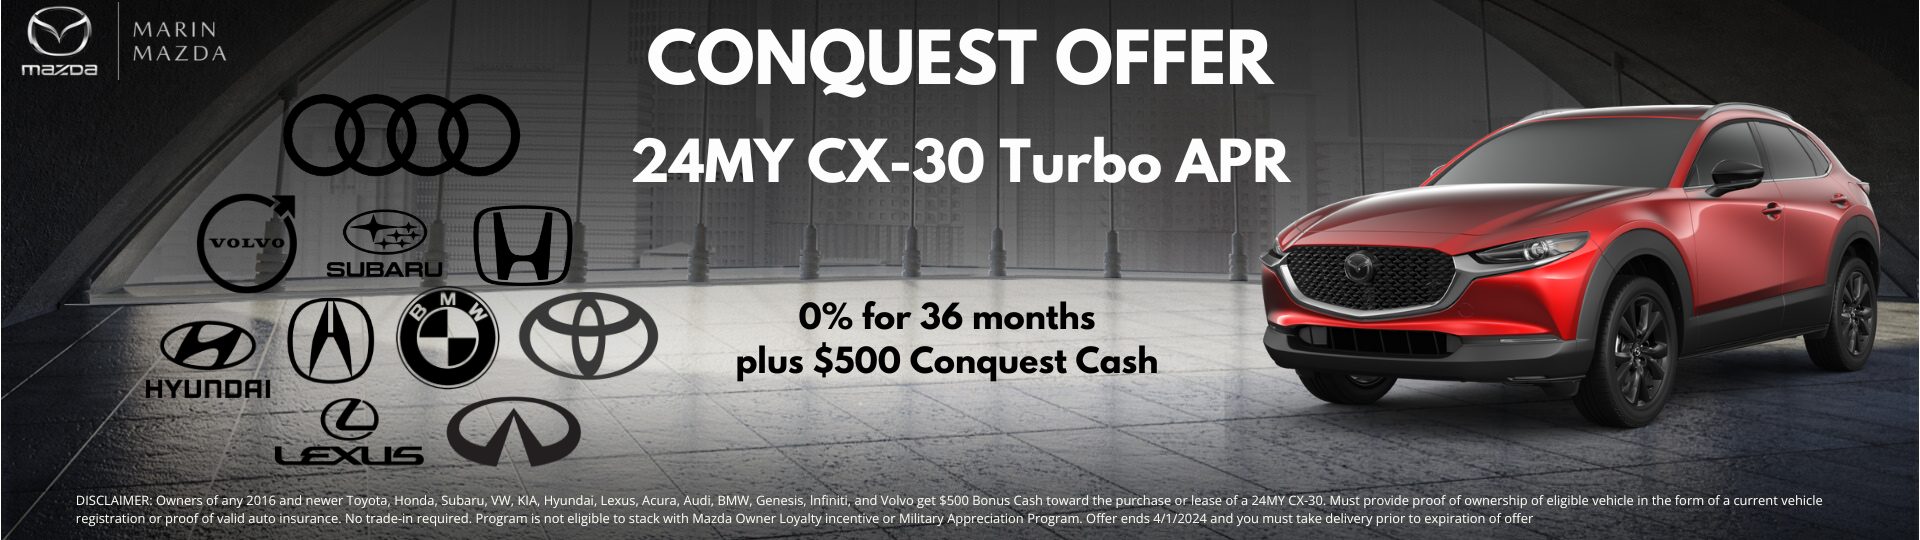 Conquest offer